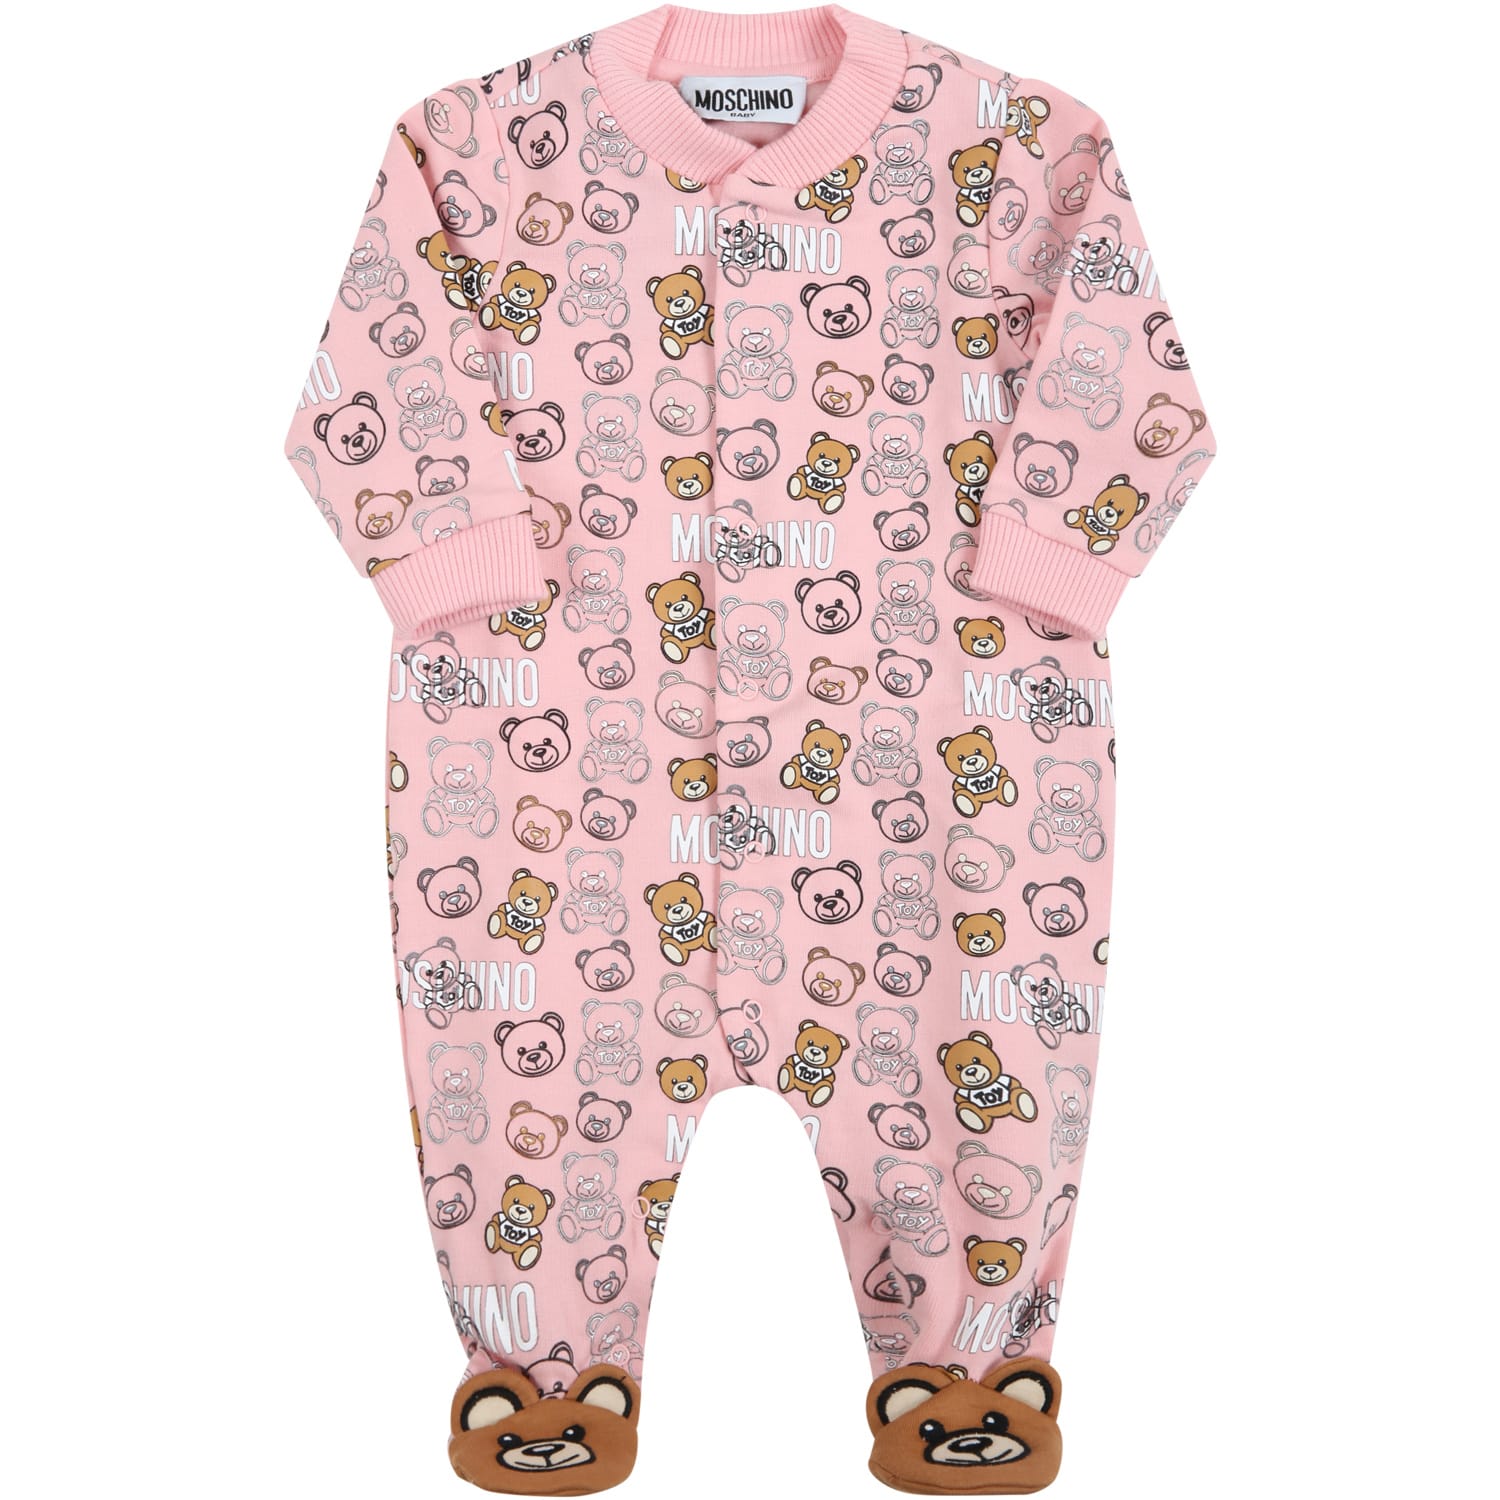 Moschino Pink Babygrow For Baby Girl With Teddy Bears